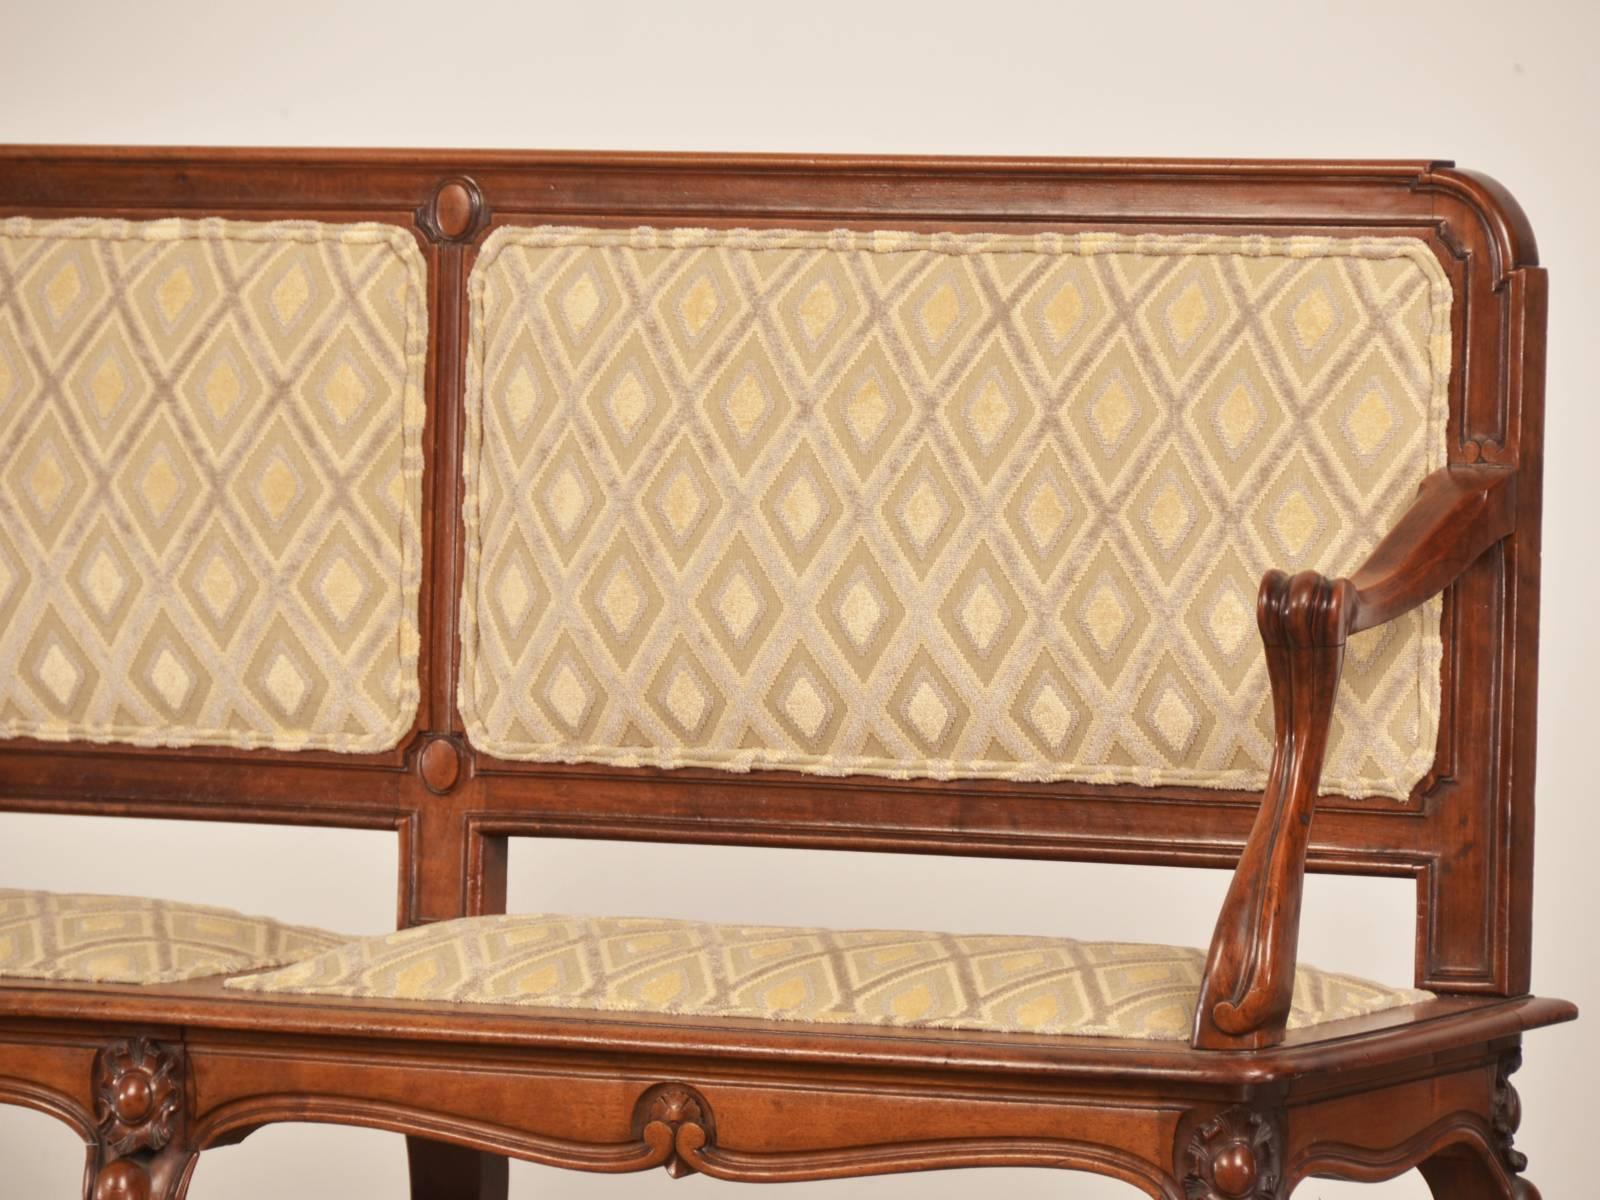 Receive our new selections direct from 1stdibs by email each week. Please click on “Follow Dealer” button below and see them first!

An antique French Art Nouveau period walnut settee bench circa 1900 with excellent carving and proportion freshly